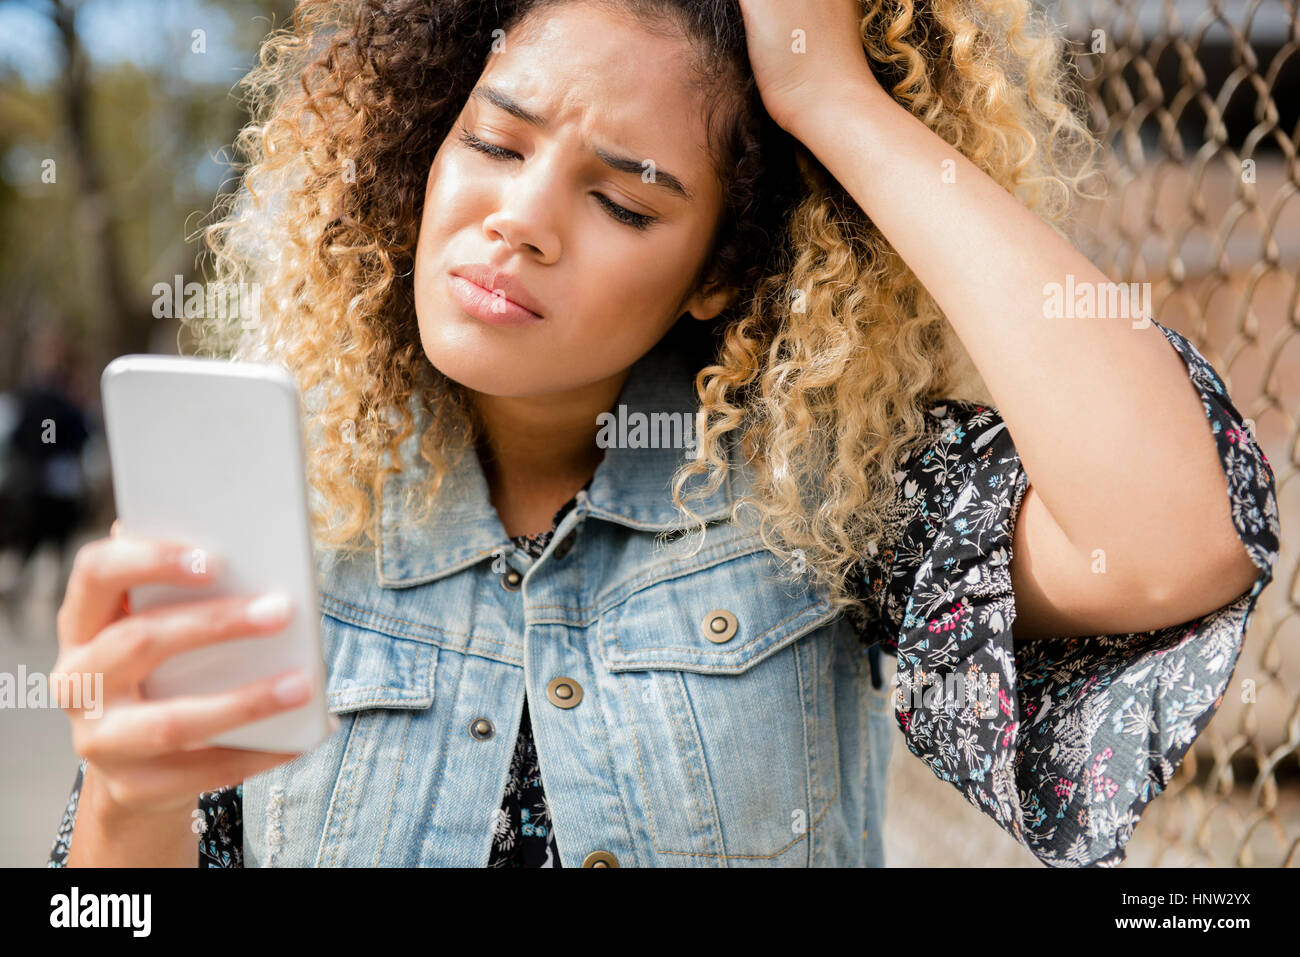 Unhappy Mixed Race woman texting on cell phone Stock Photo